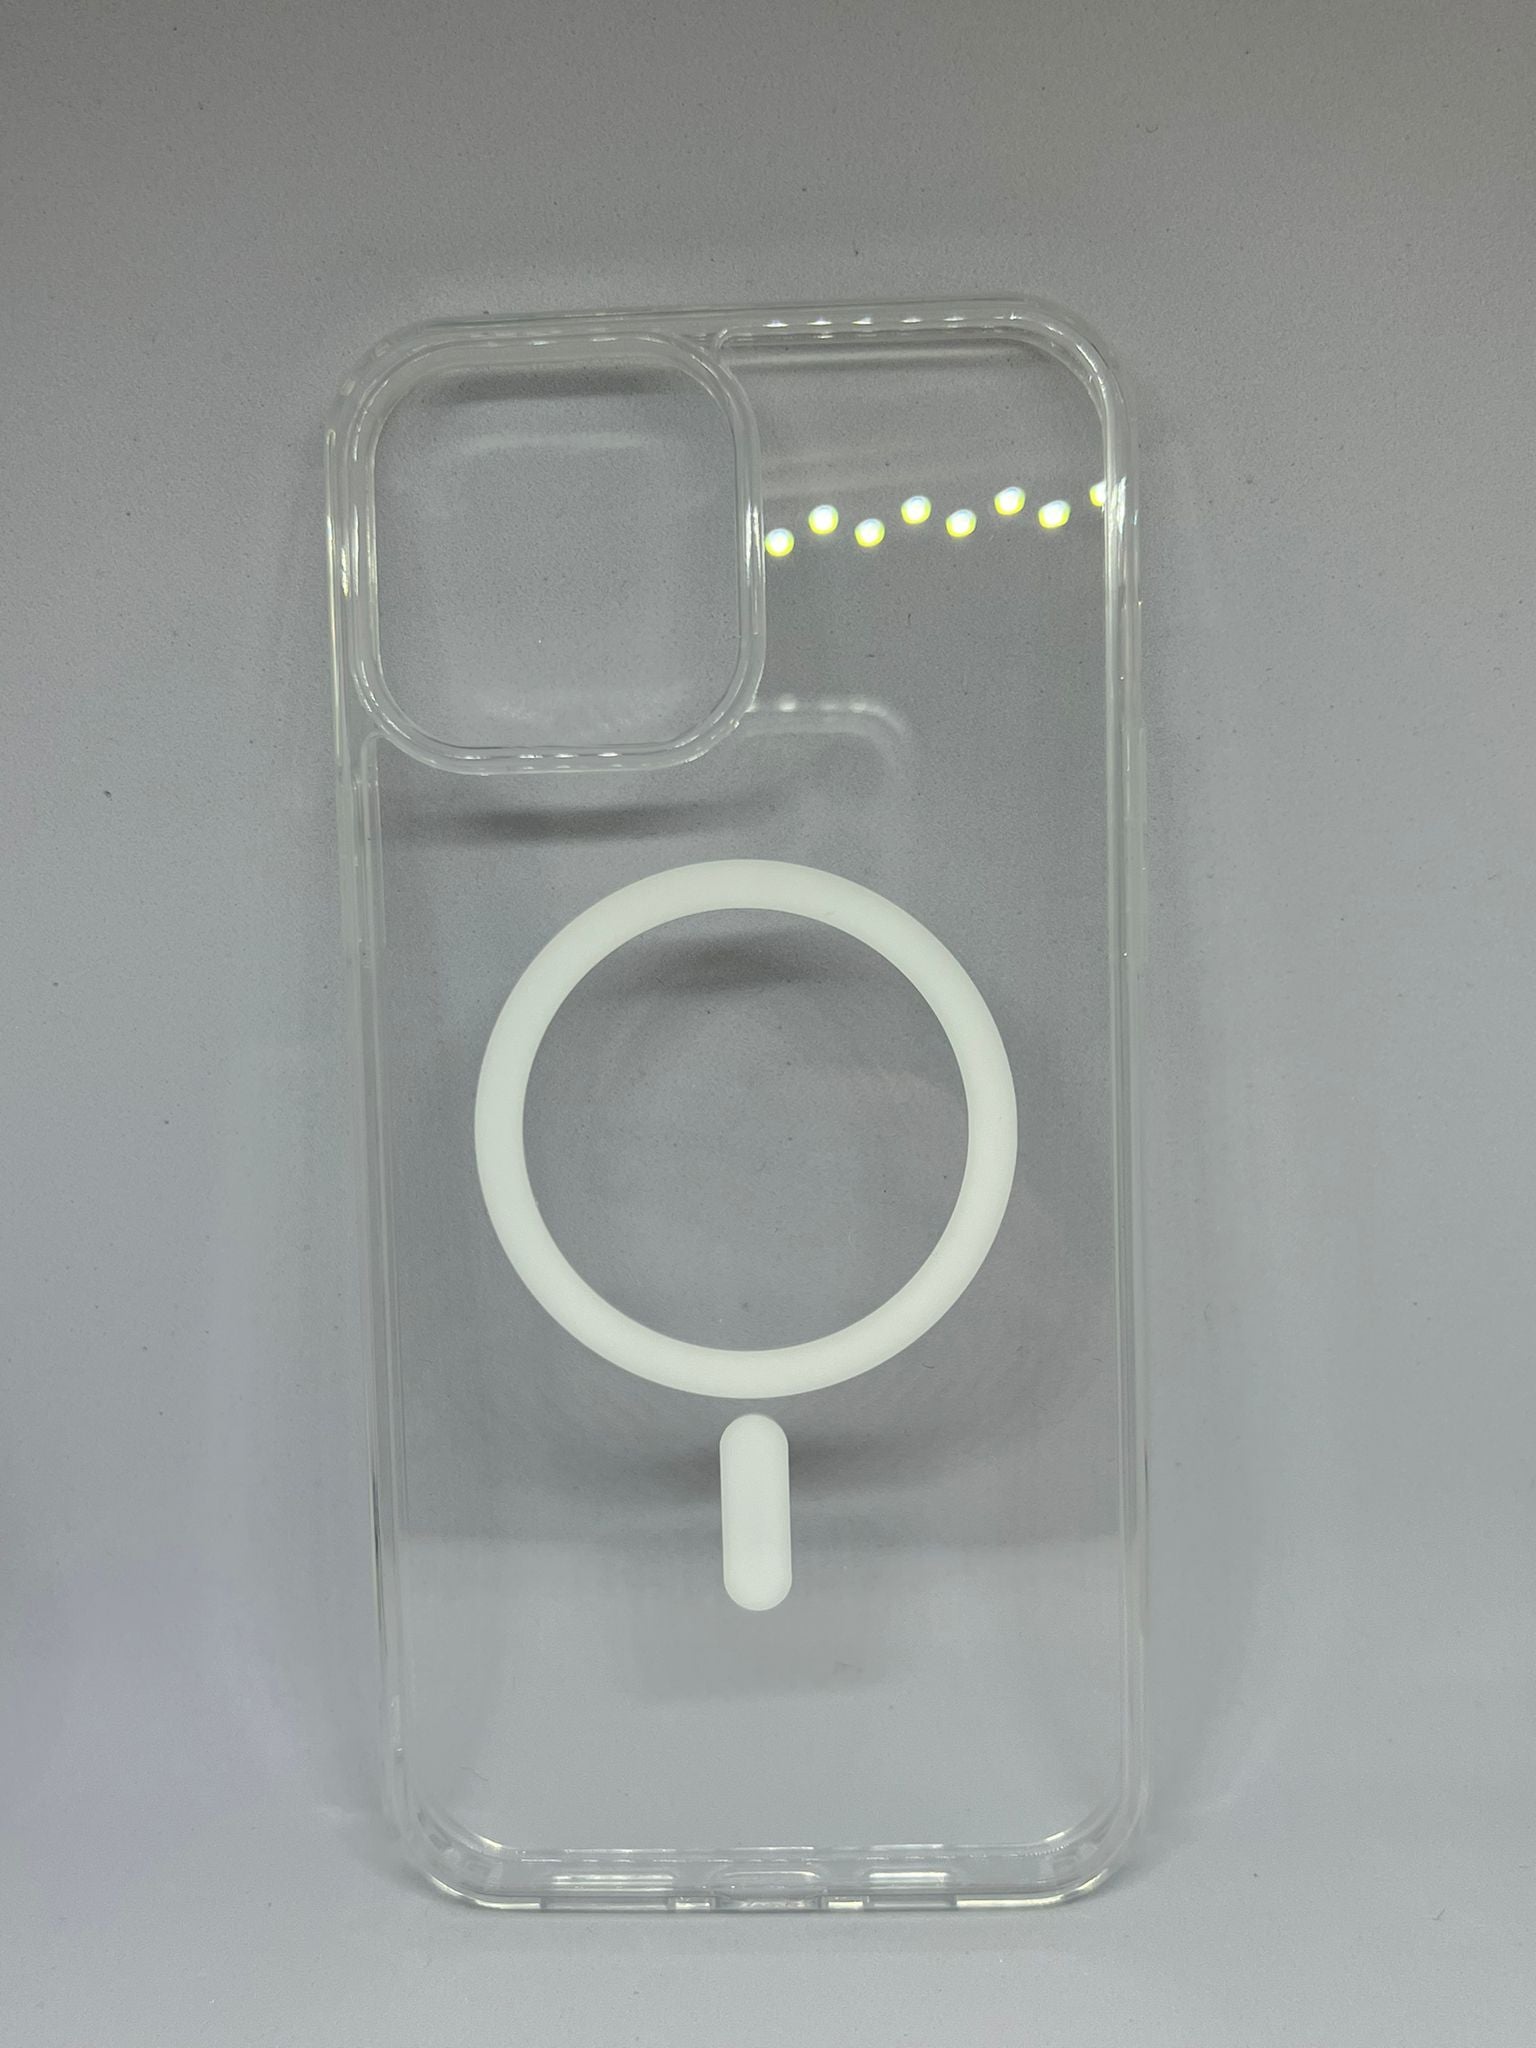 iPhone 13 Mini Clear Case With MagSafe (Not Apple Brand)